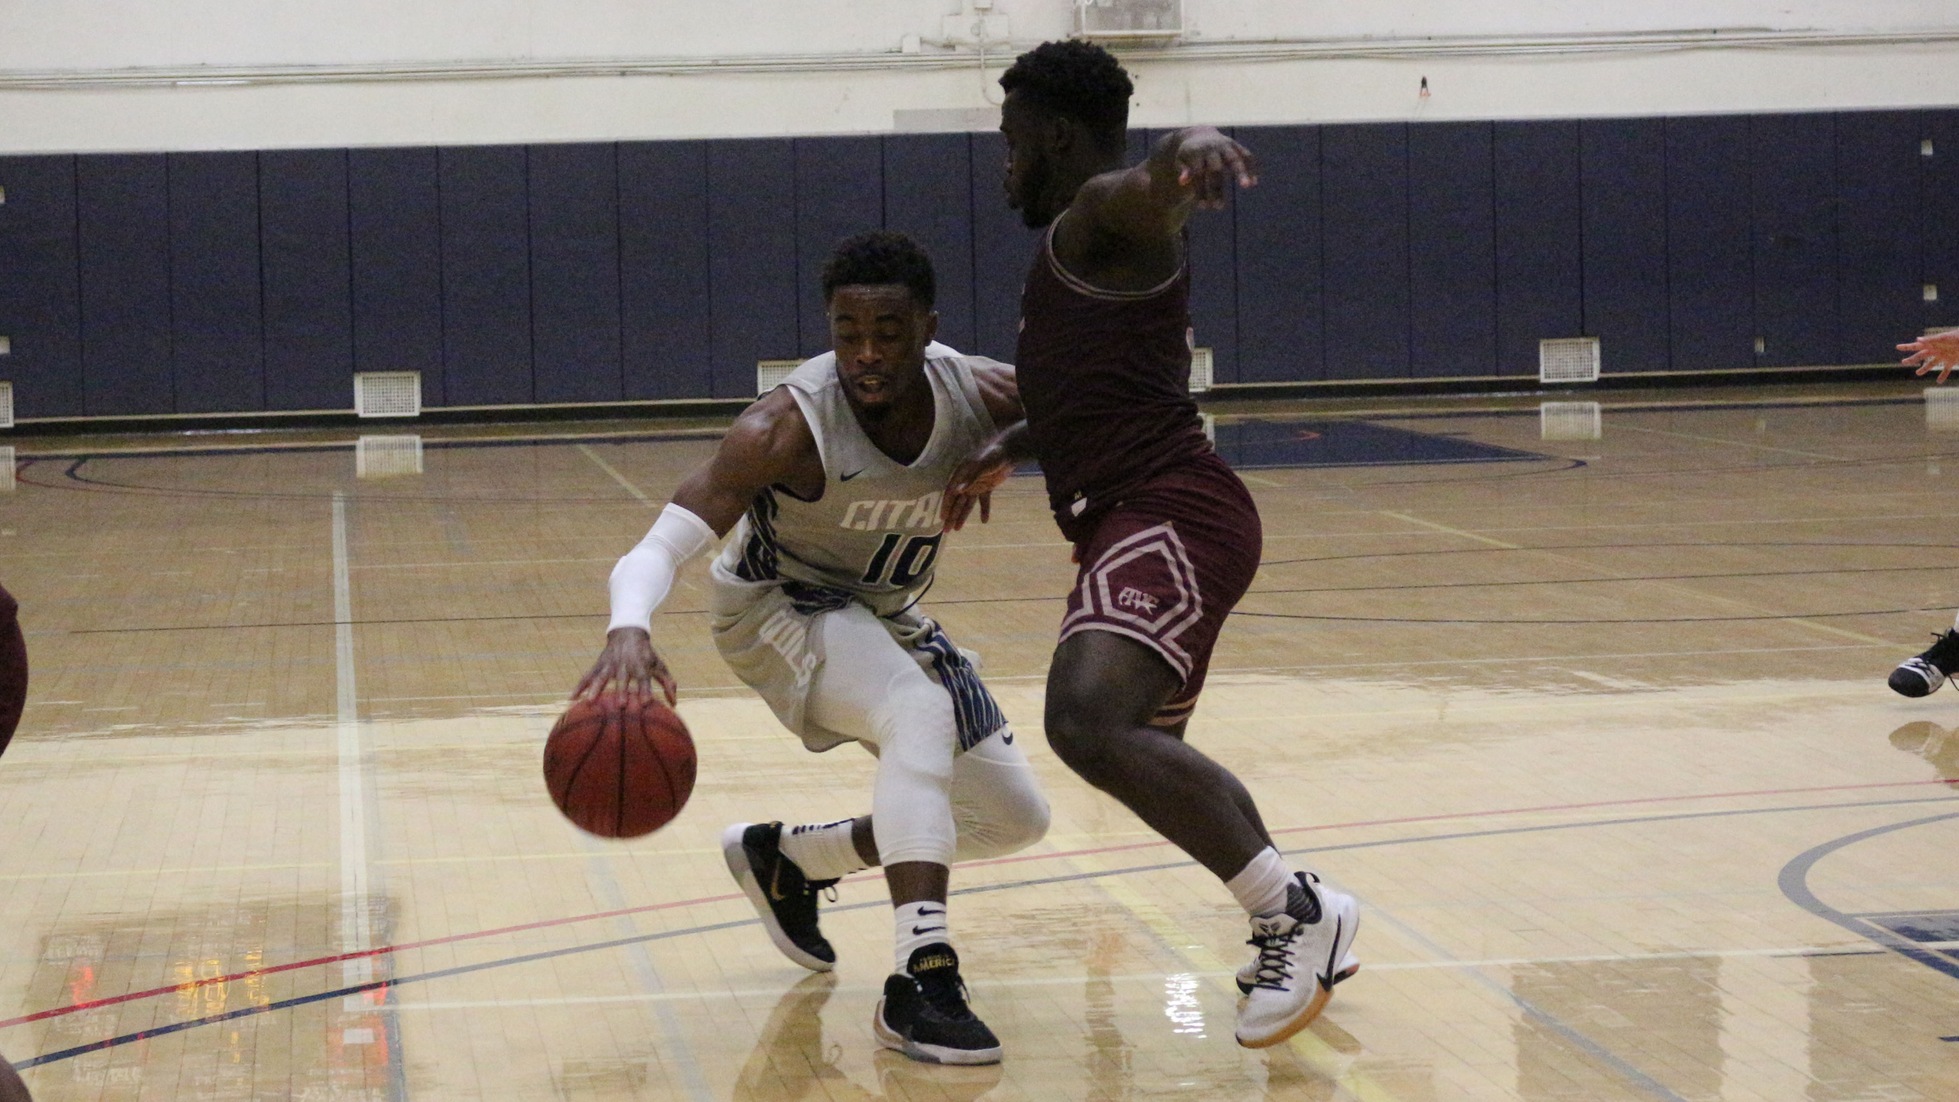 Toby Okwuokei led the Owls with 19 points and 10 rebounds and five assists. Photo by: Brianna Jara